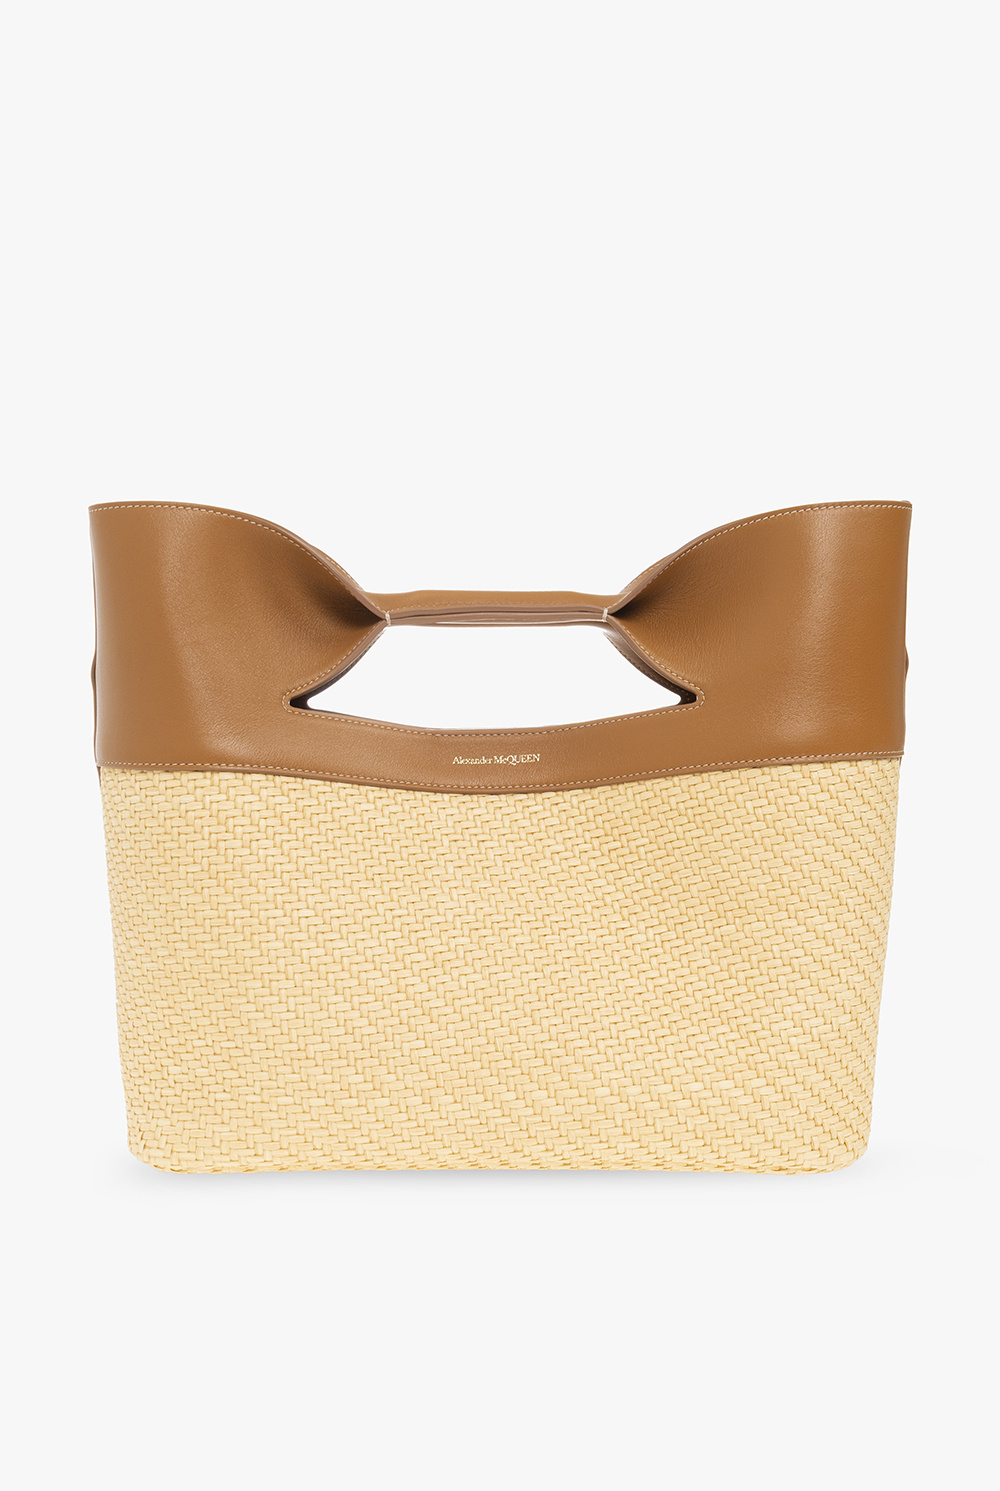 Alexander McQueen ‘The Bow Small’ wool bag